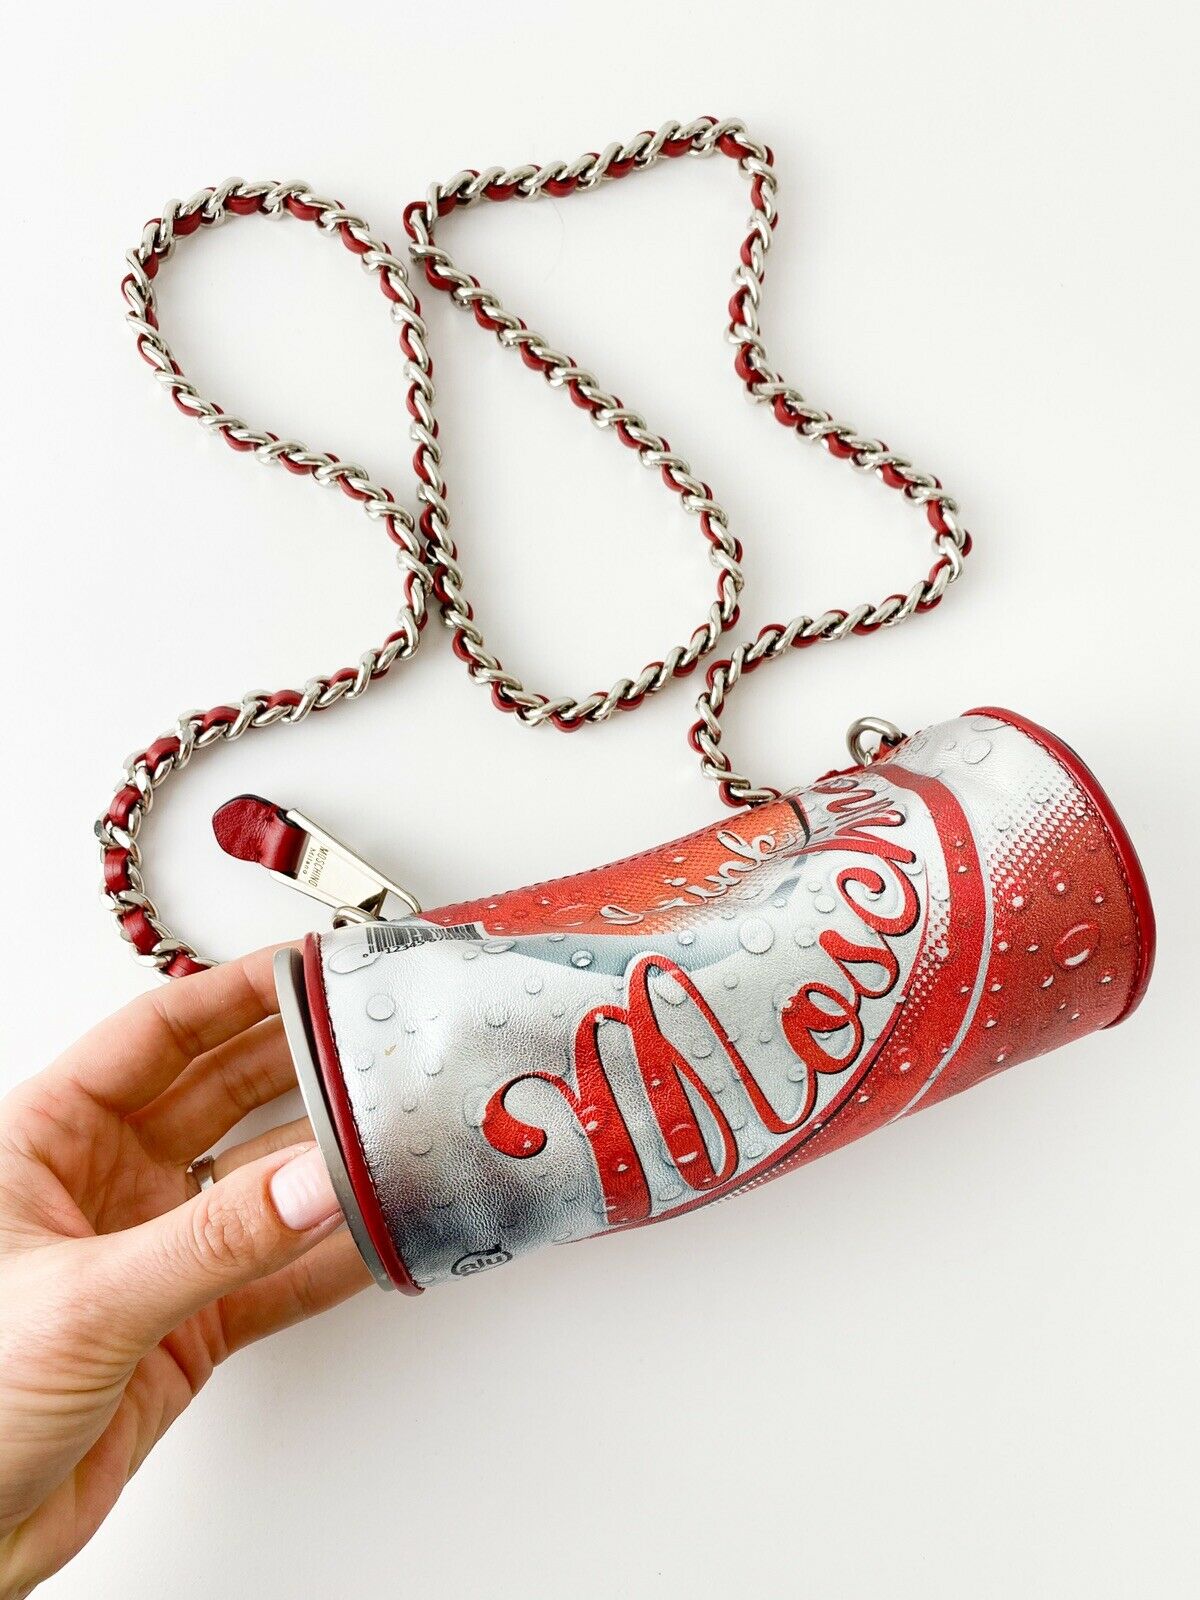 【SOLD OUT】Moschino Milano  Coca Cola Bottle Bag